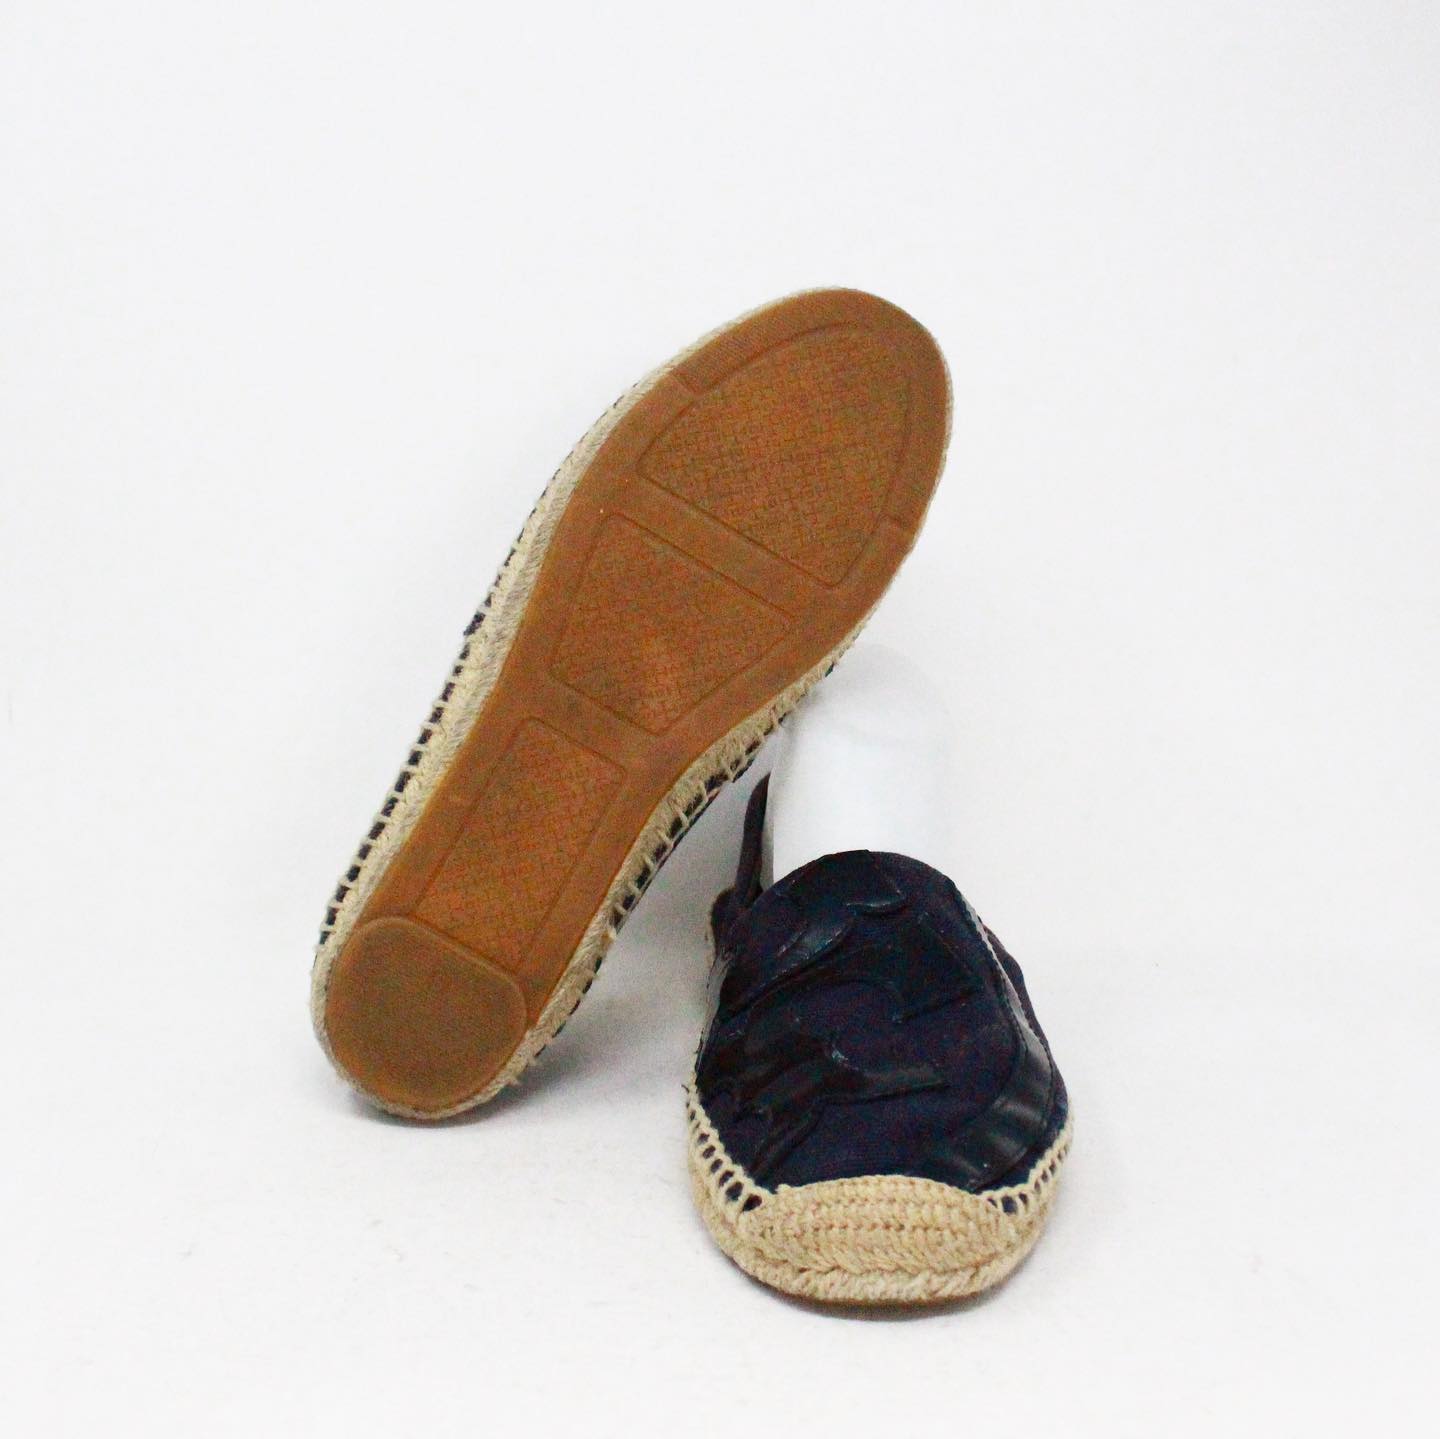 Tory Burch Black/White Canvas And Leather Logo Lonnie Espadrilles Flats  Size 37 Tory Burch